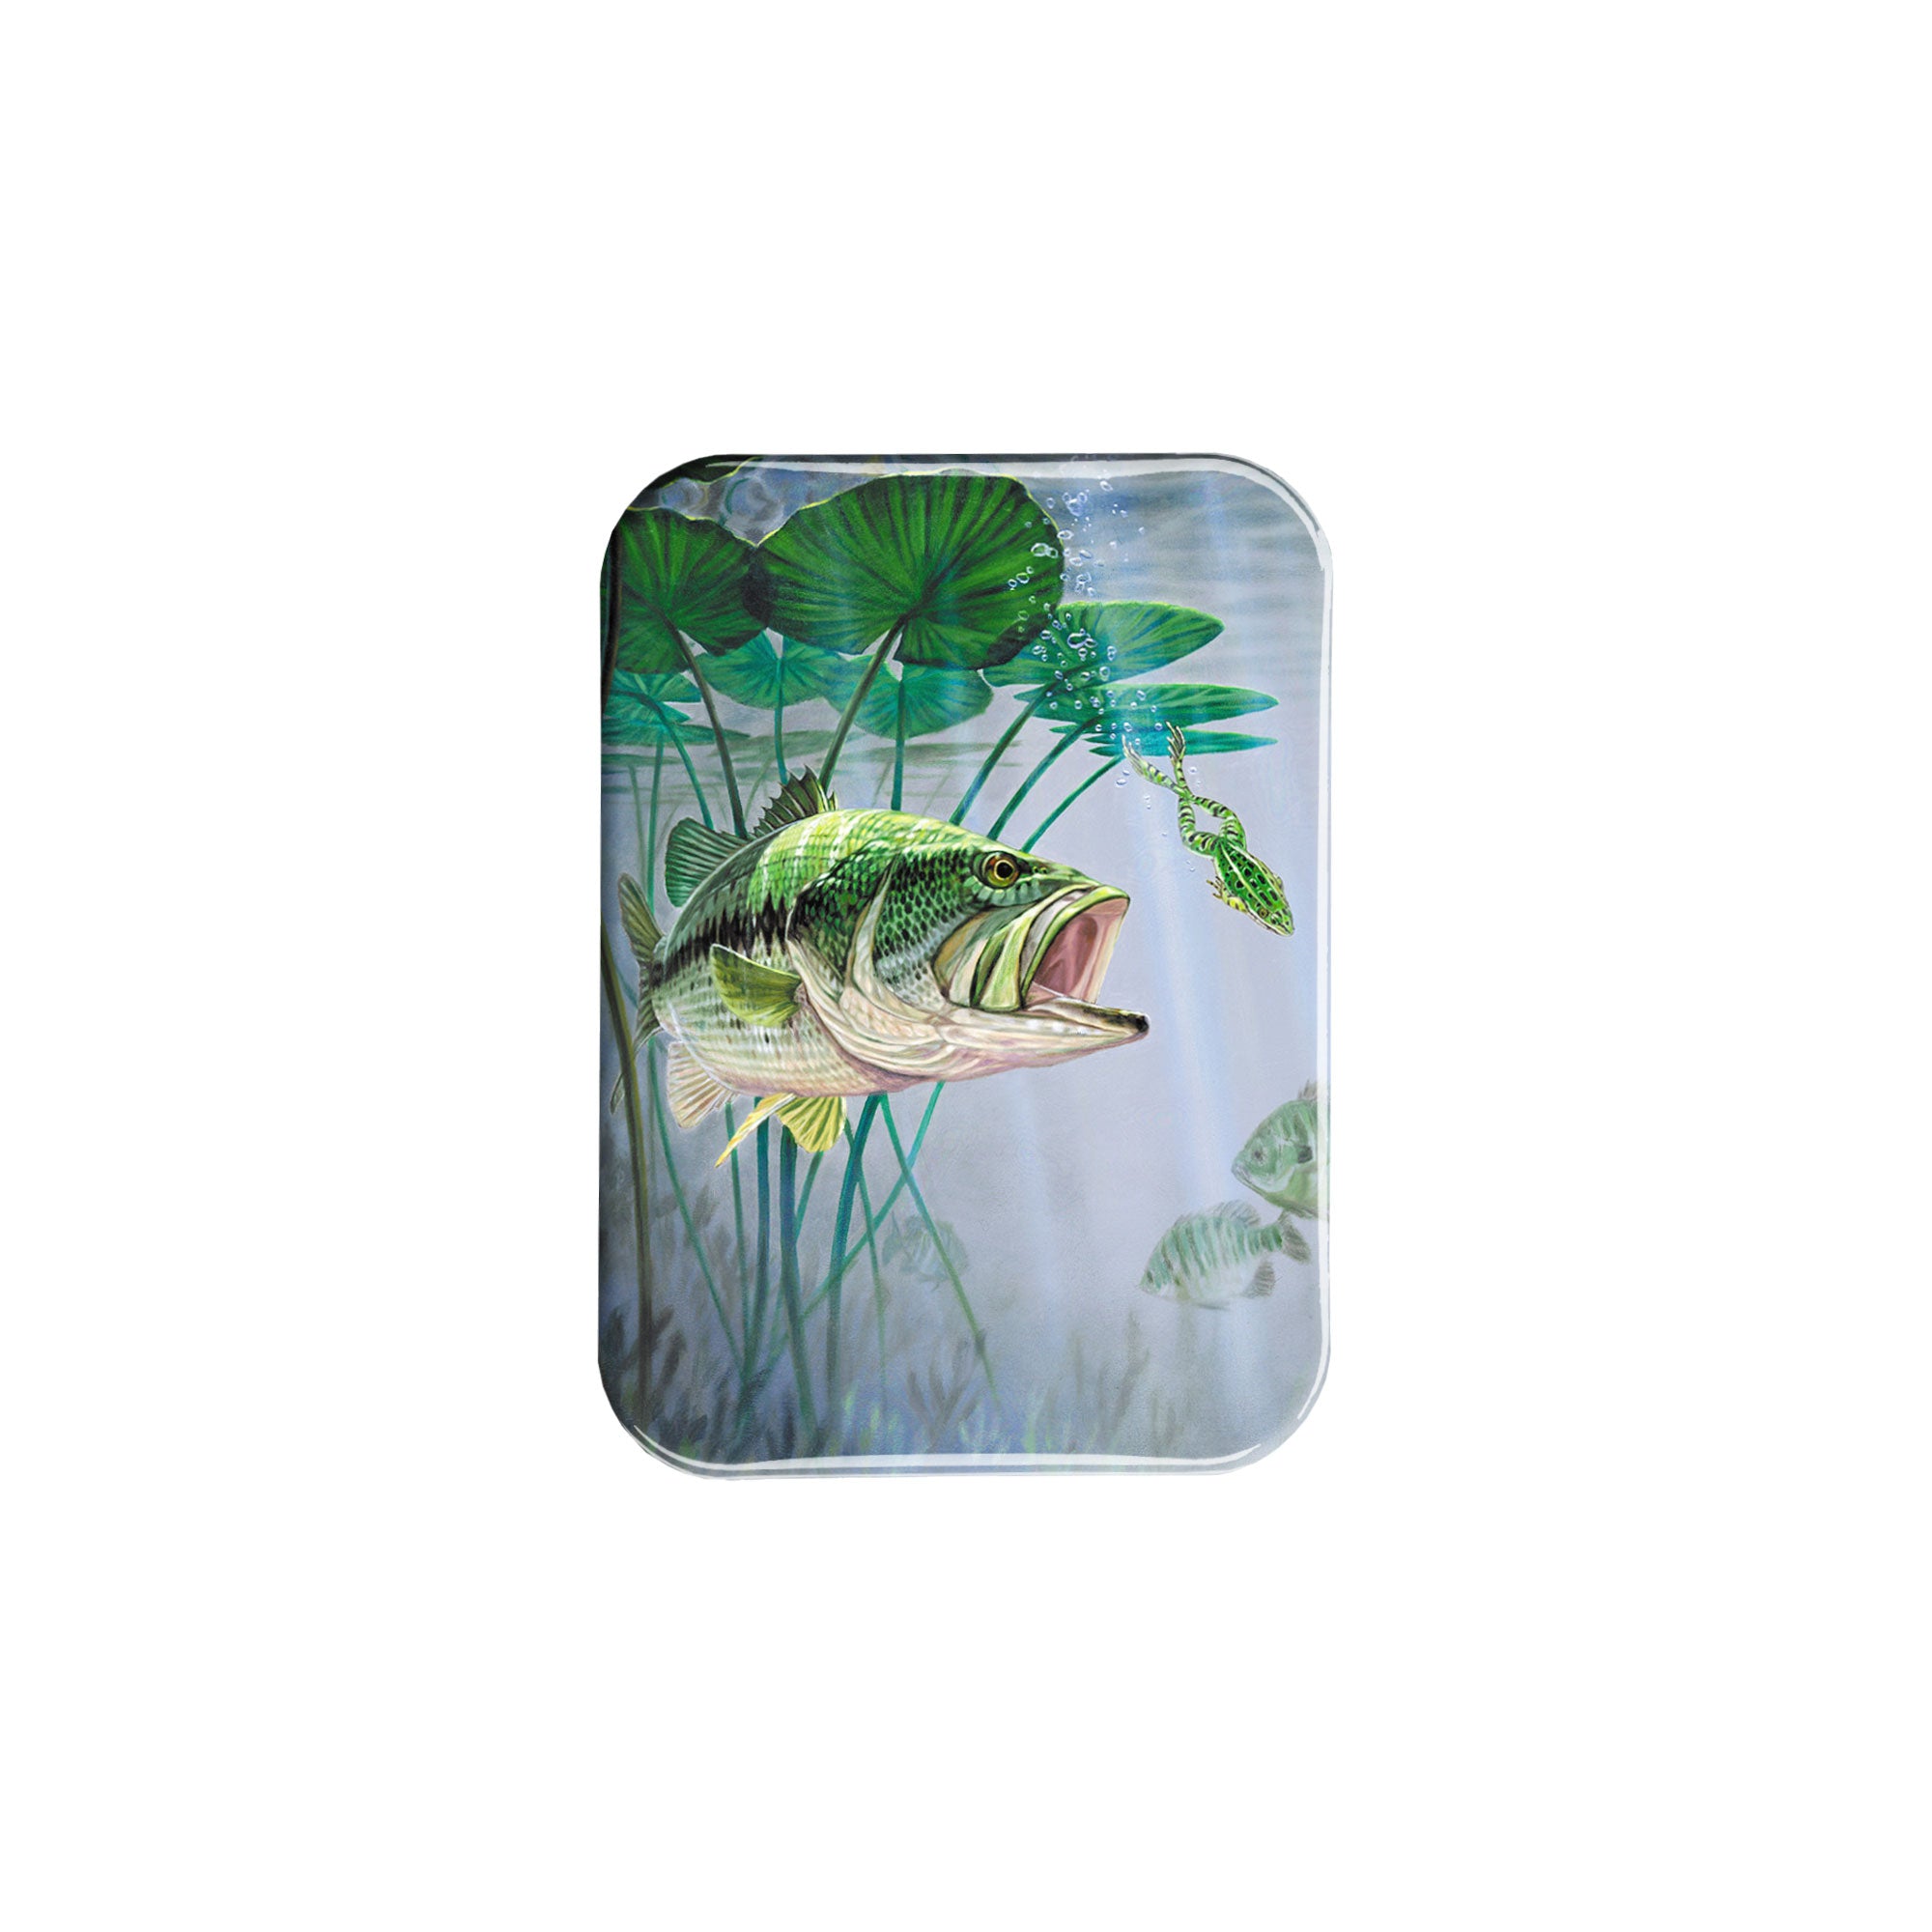 "Bass And Leopard Frog" - 2.5" X 3.5" Rectangle Fridge Magnets